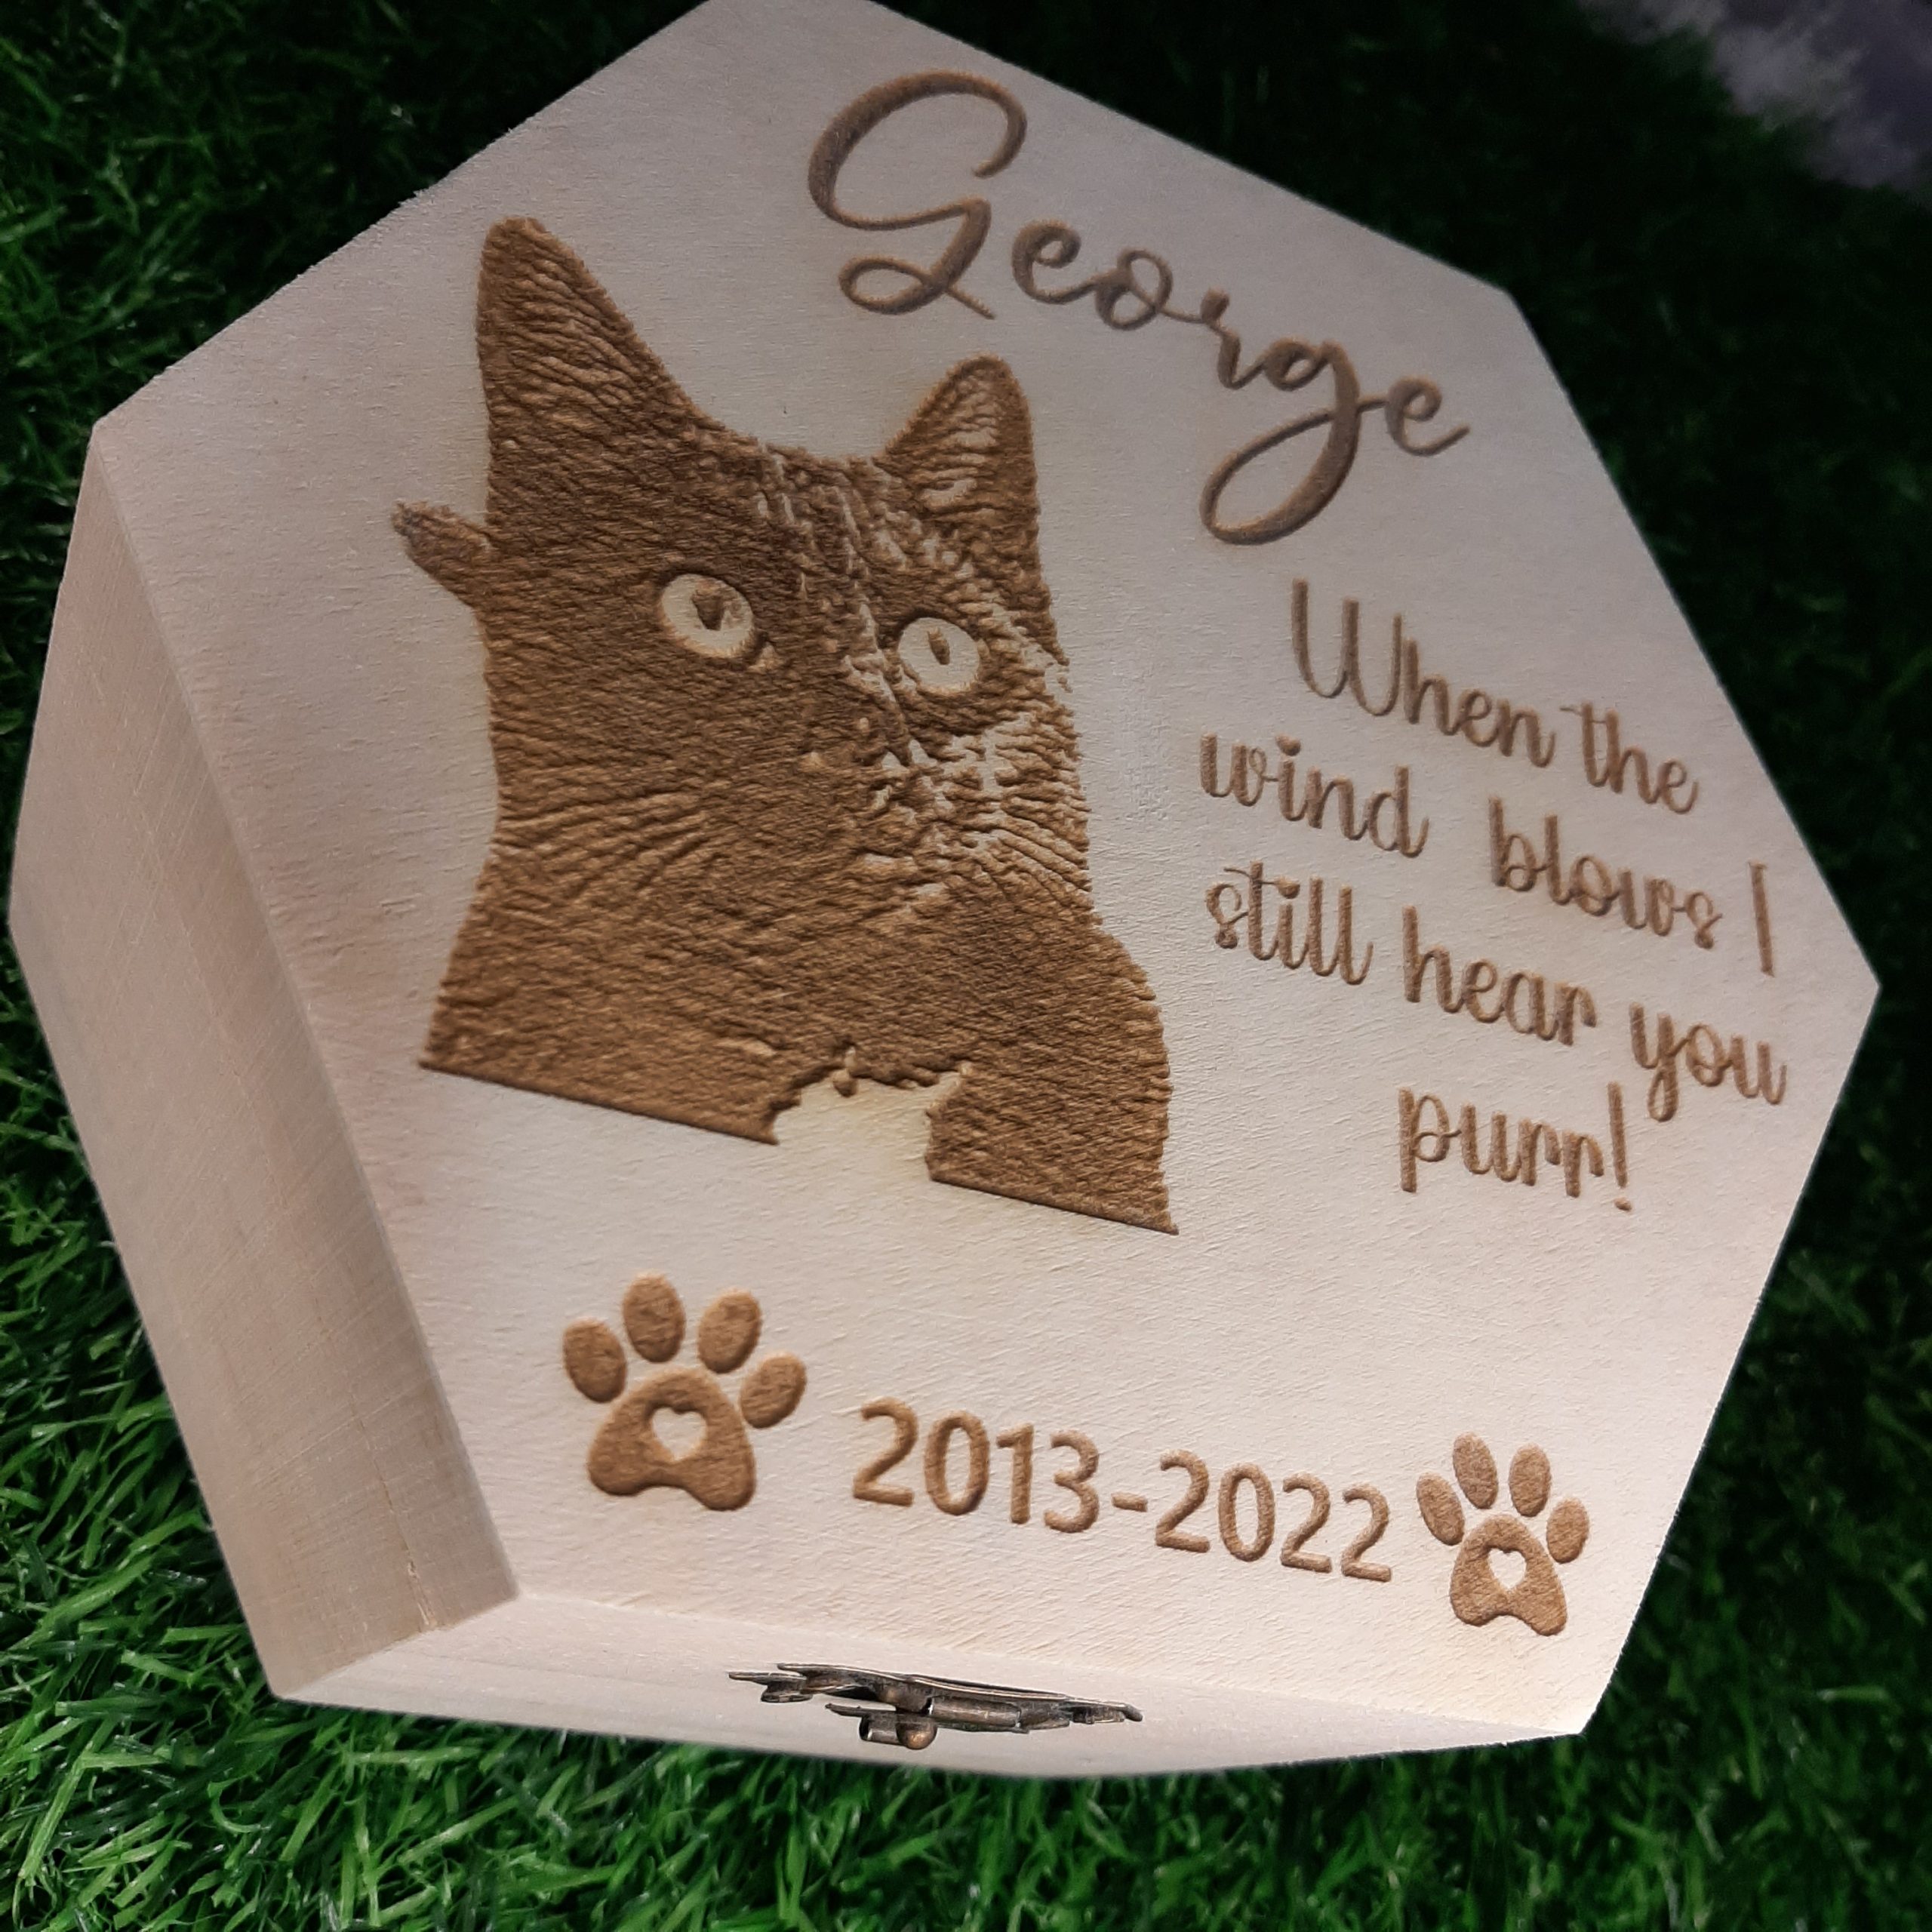 Zoomed in on the engraving of the pet memory box